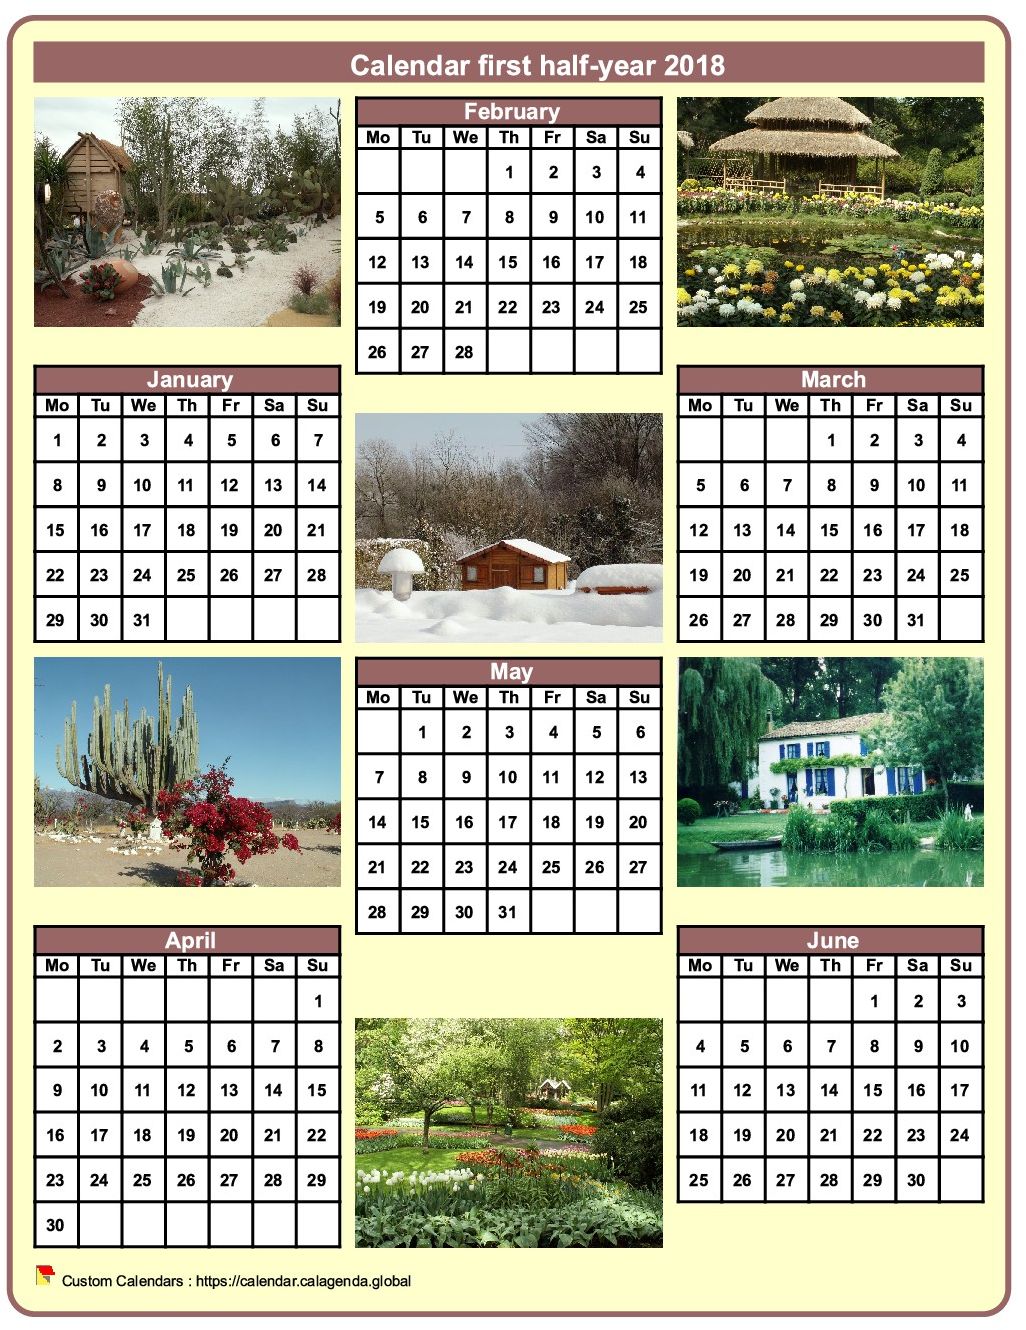 Calendar 2018 half-year with a different photo every month